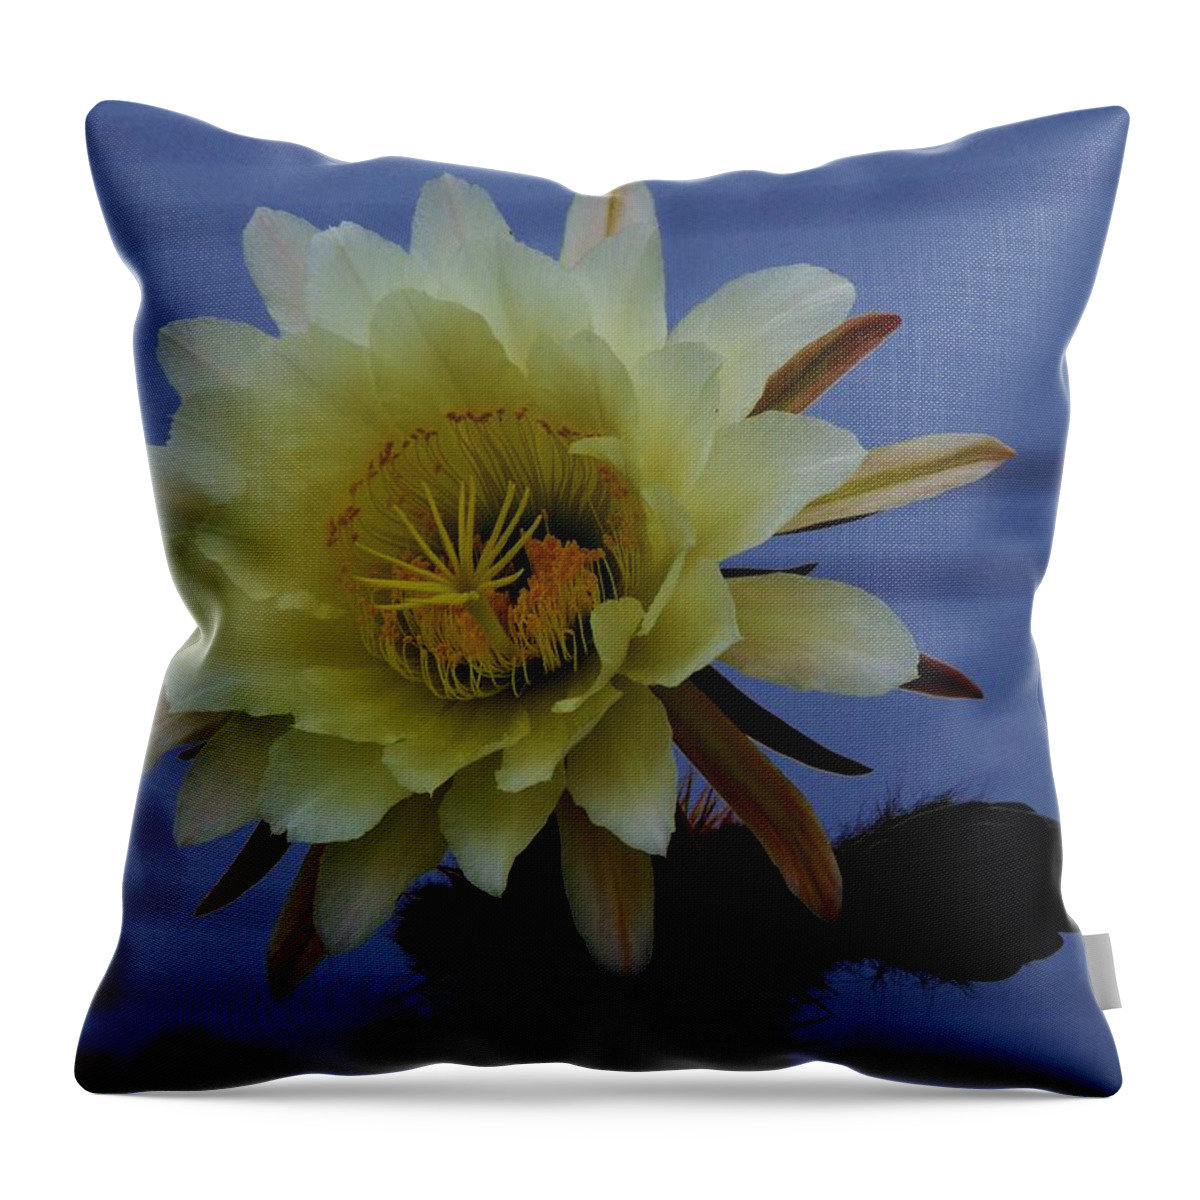 Cactus Flower Throw Pillow featuring the photograph Cactus flower by Helen Carson